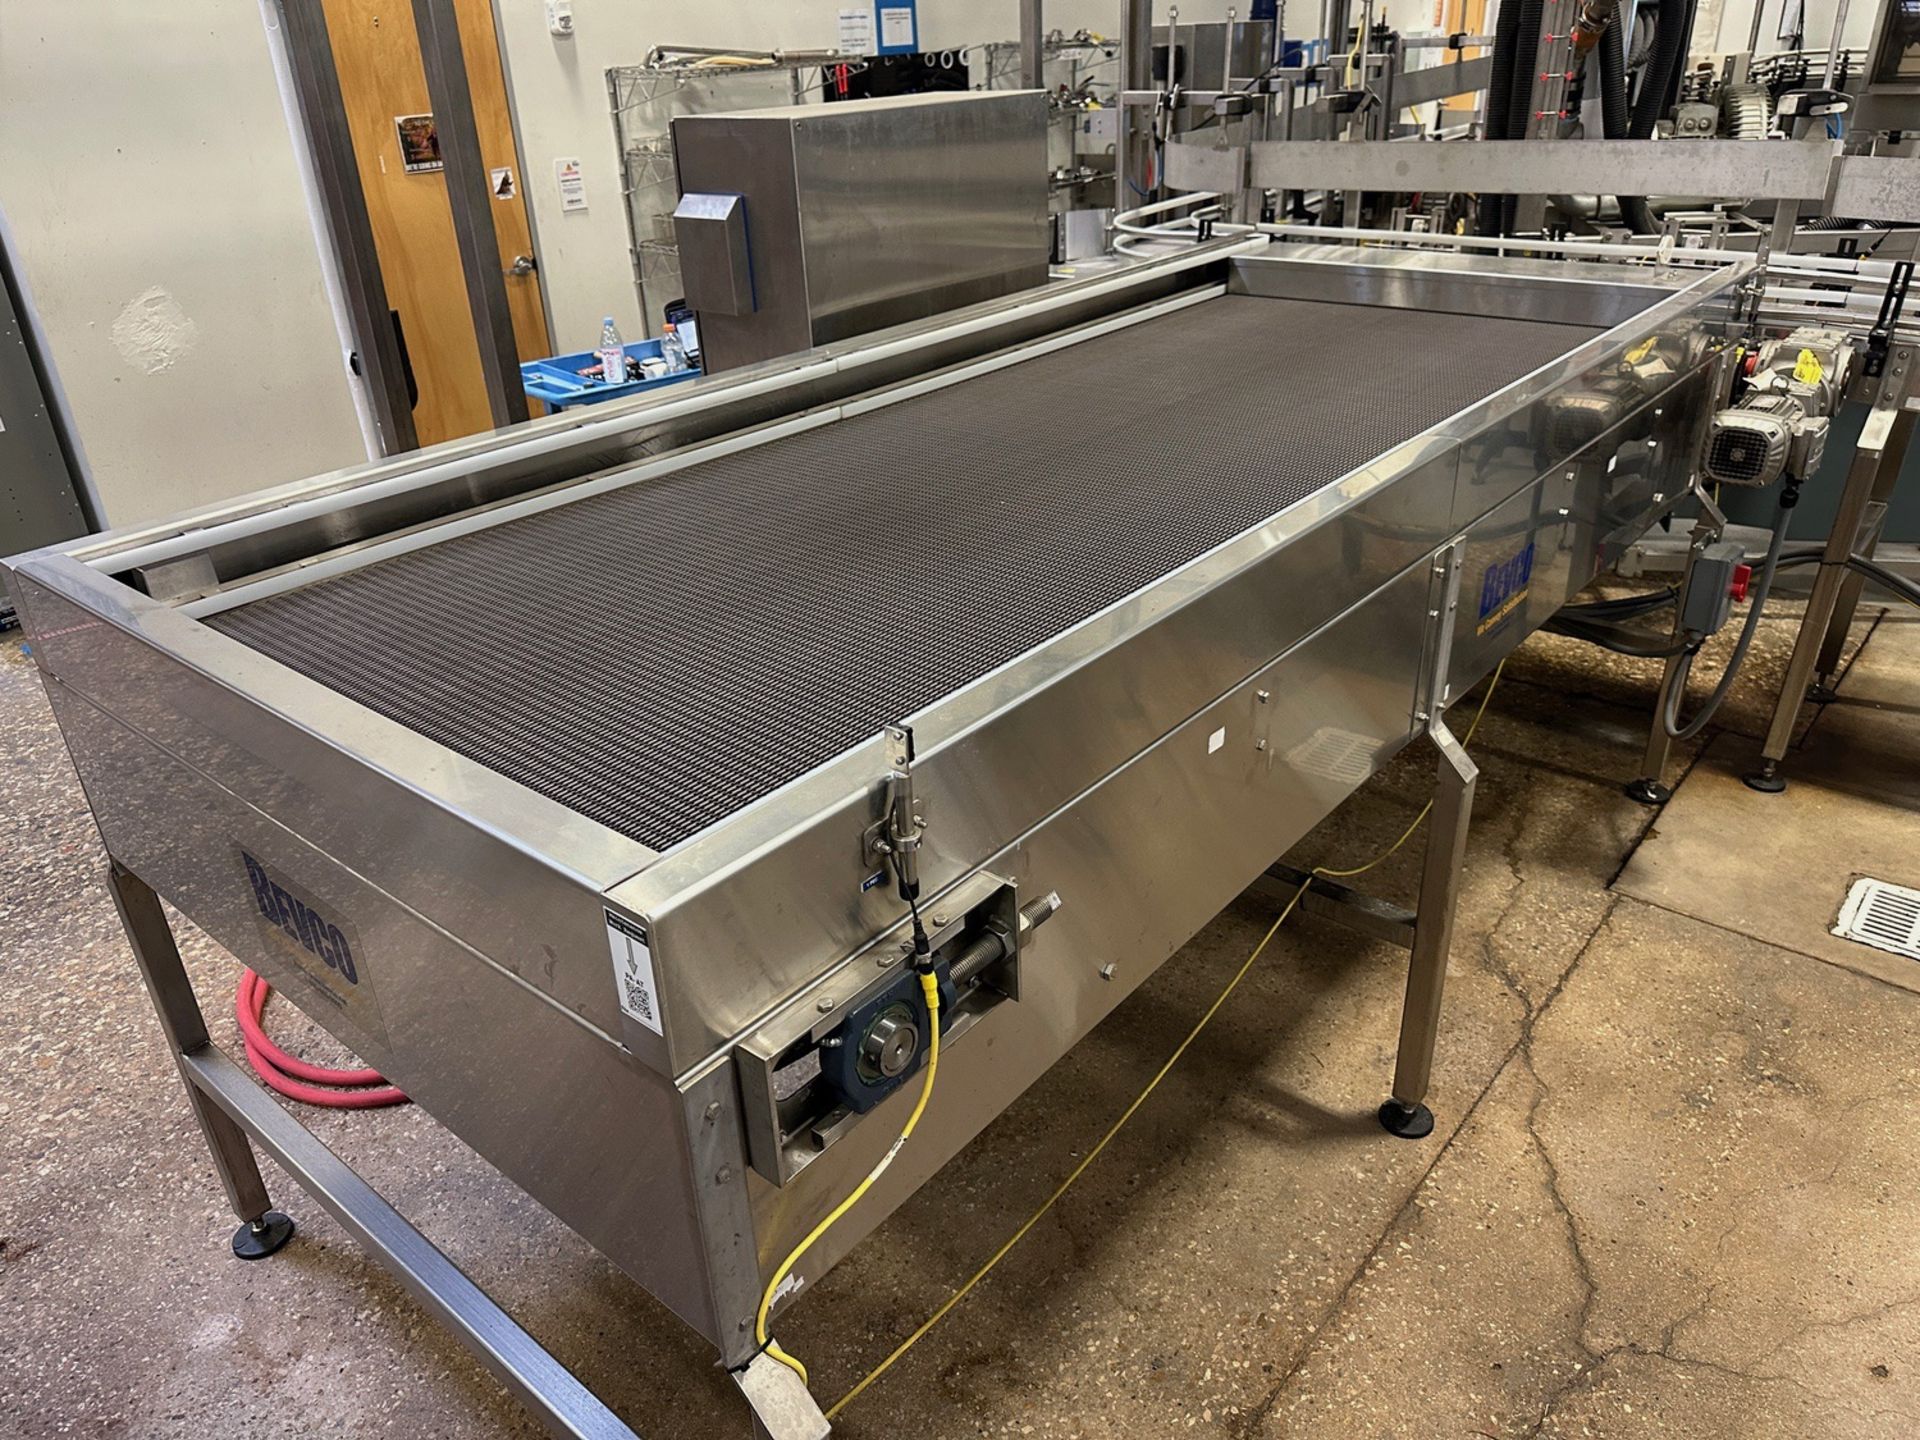 Bevco Accumulation Table over Stainless Steel Frame (Approx. 4' x 11') - Image 2 of 4